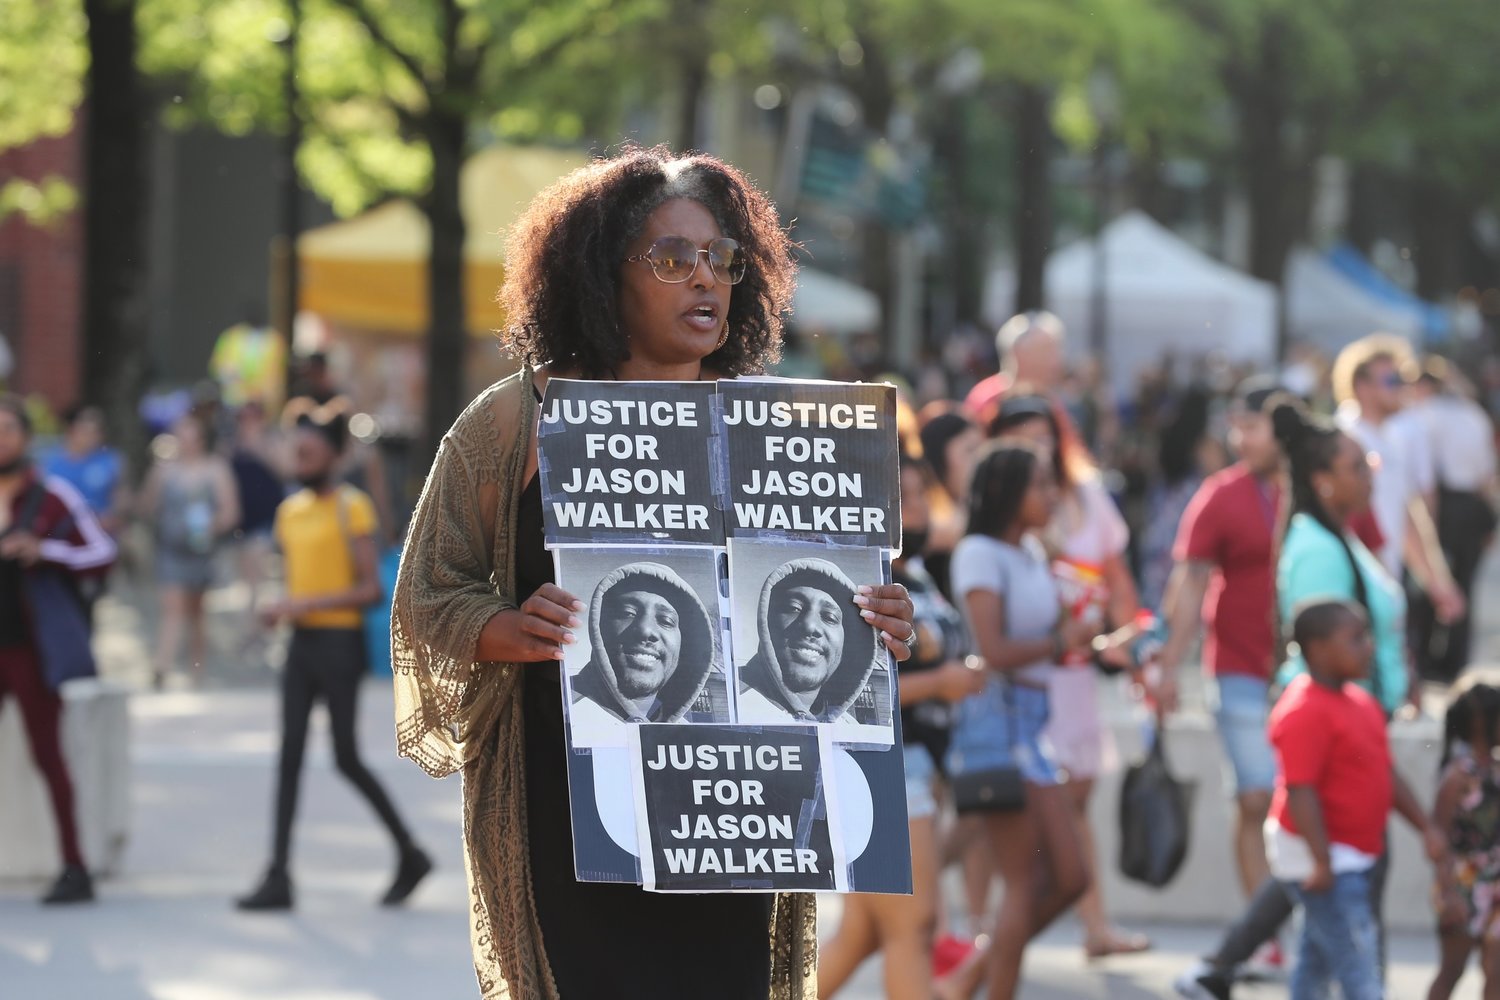 Protesters gathered at the Market House on Saturday to demonstrate against a decision this week by a special prosecutor not to charge a deputy in the shooting death of Jason Walker. Some people attending the Fayetteville Dogwood Festival stopped to watch the protesters.